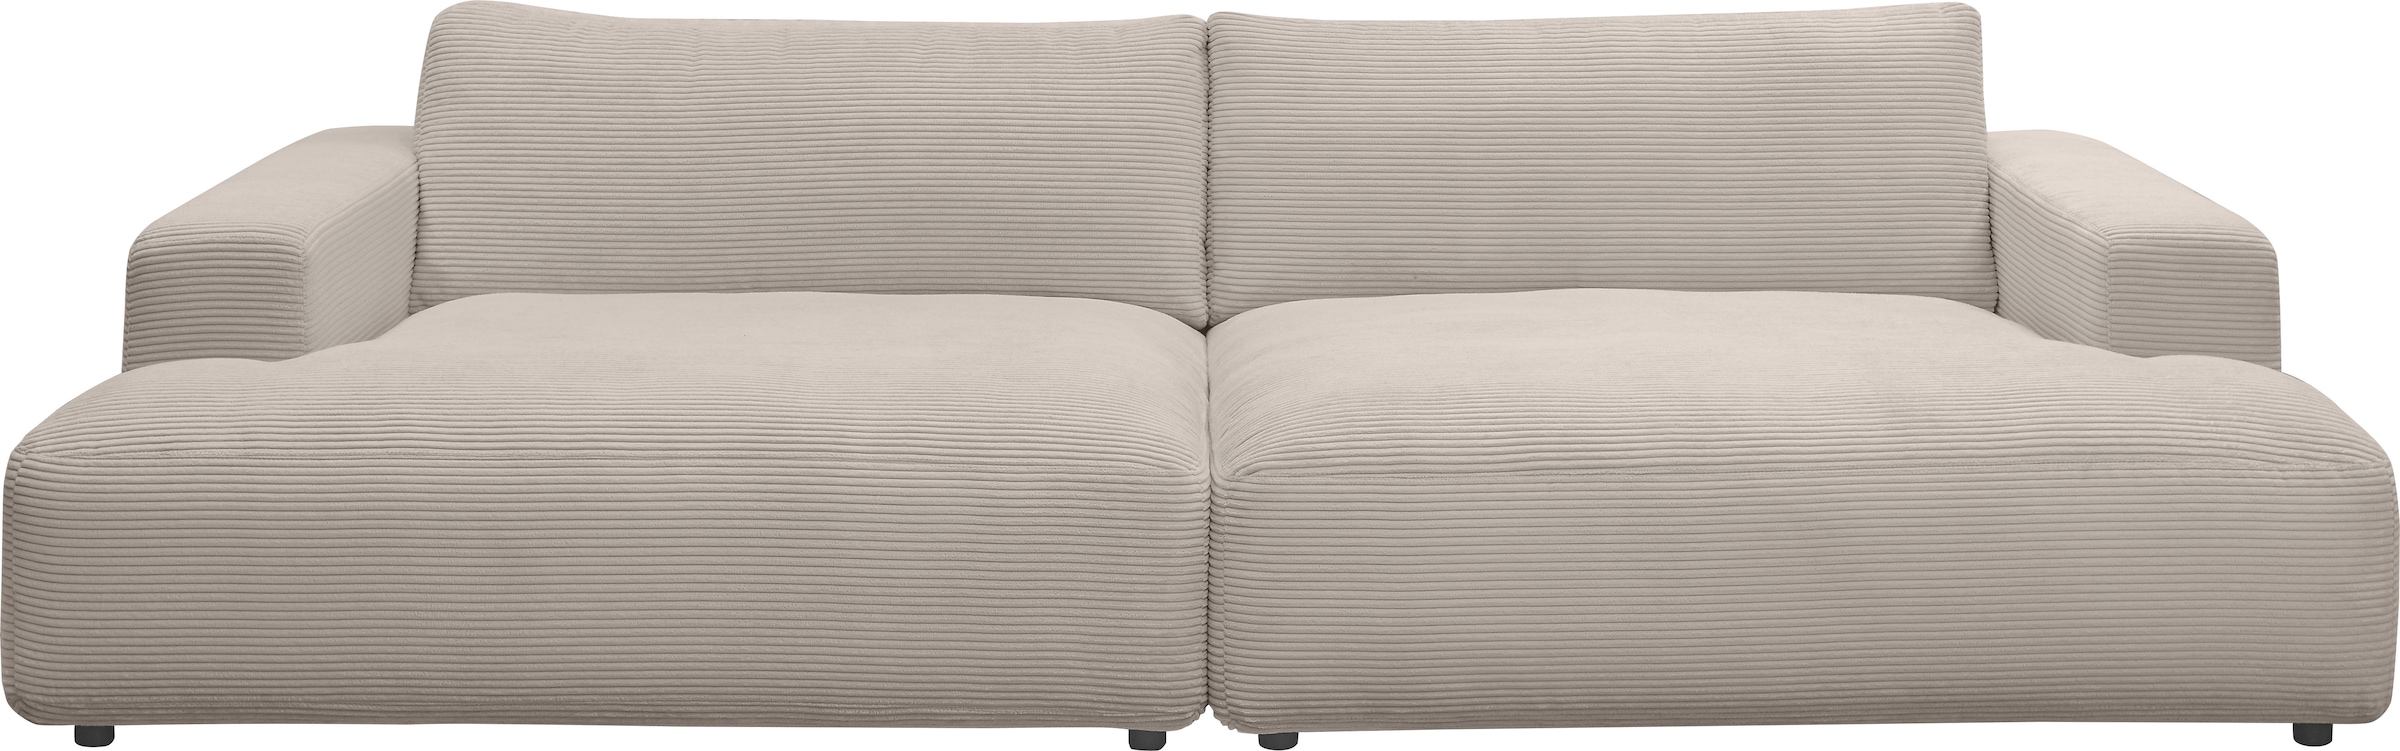 Breite by M kaufen GALLERY Cord-Bezug, »Lucia«, Musterring cm branded Loungesofa bequem 292